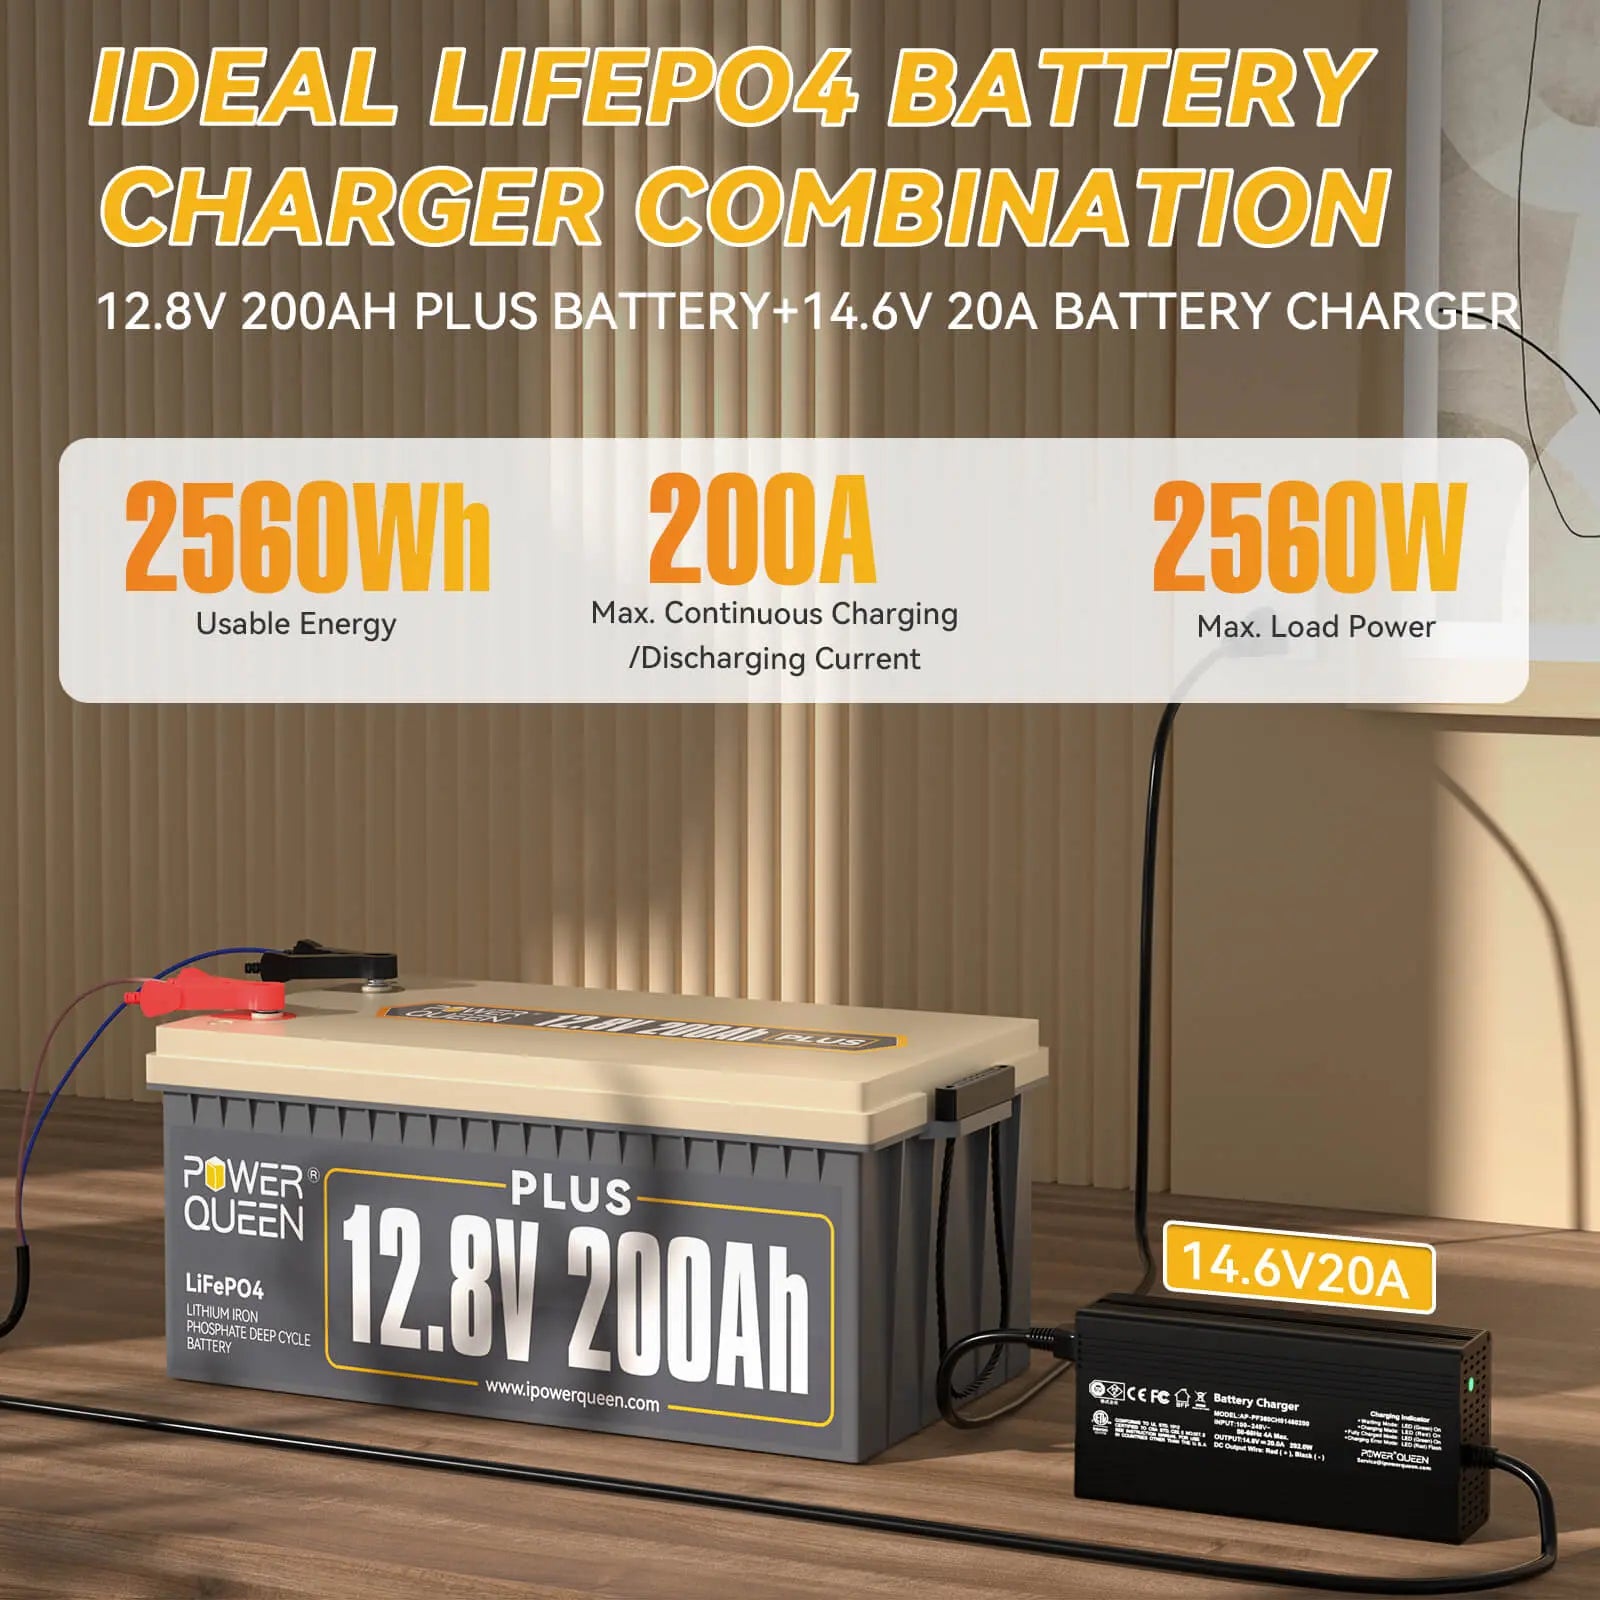 Power Queen 12V 200Ah Plus LiFePO4 Battery + 14.6V 20A Charger